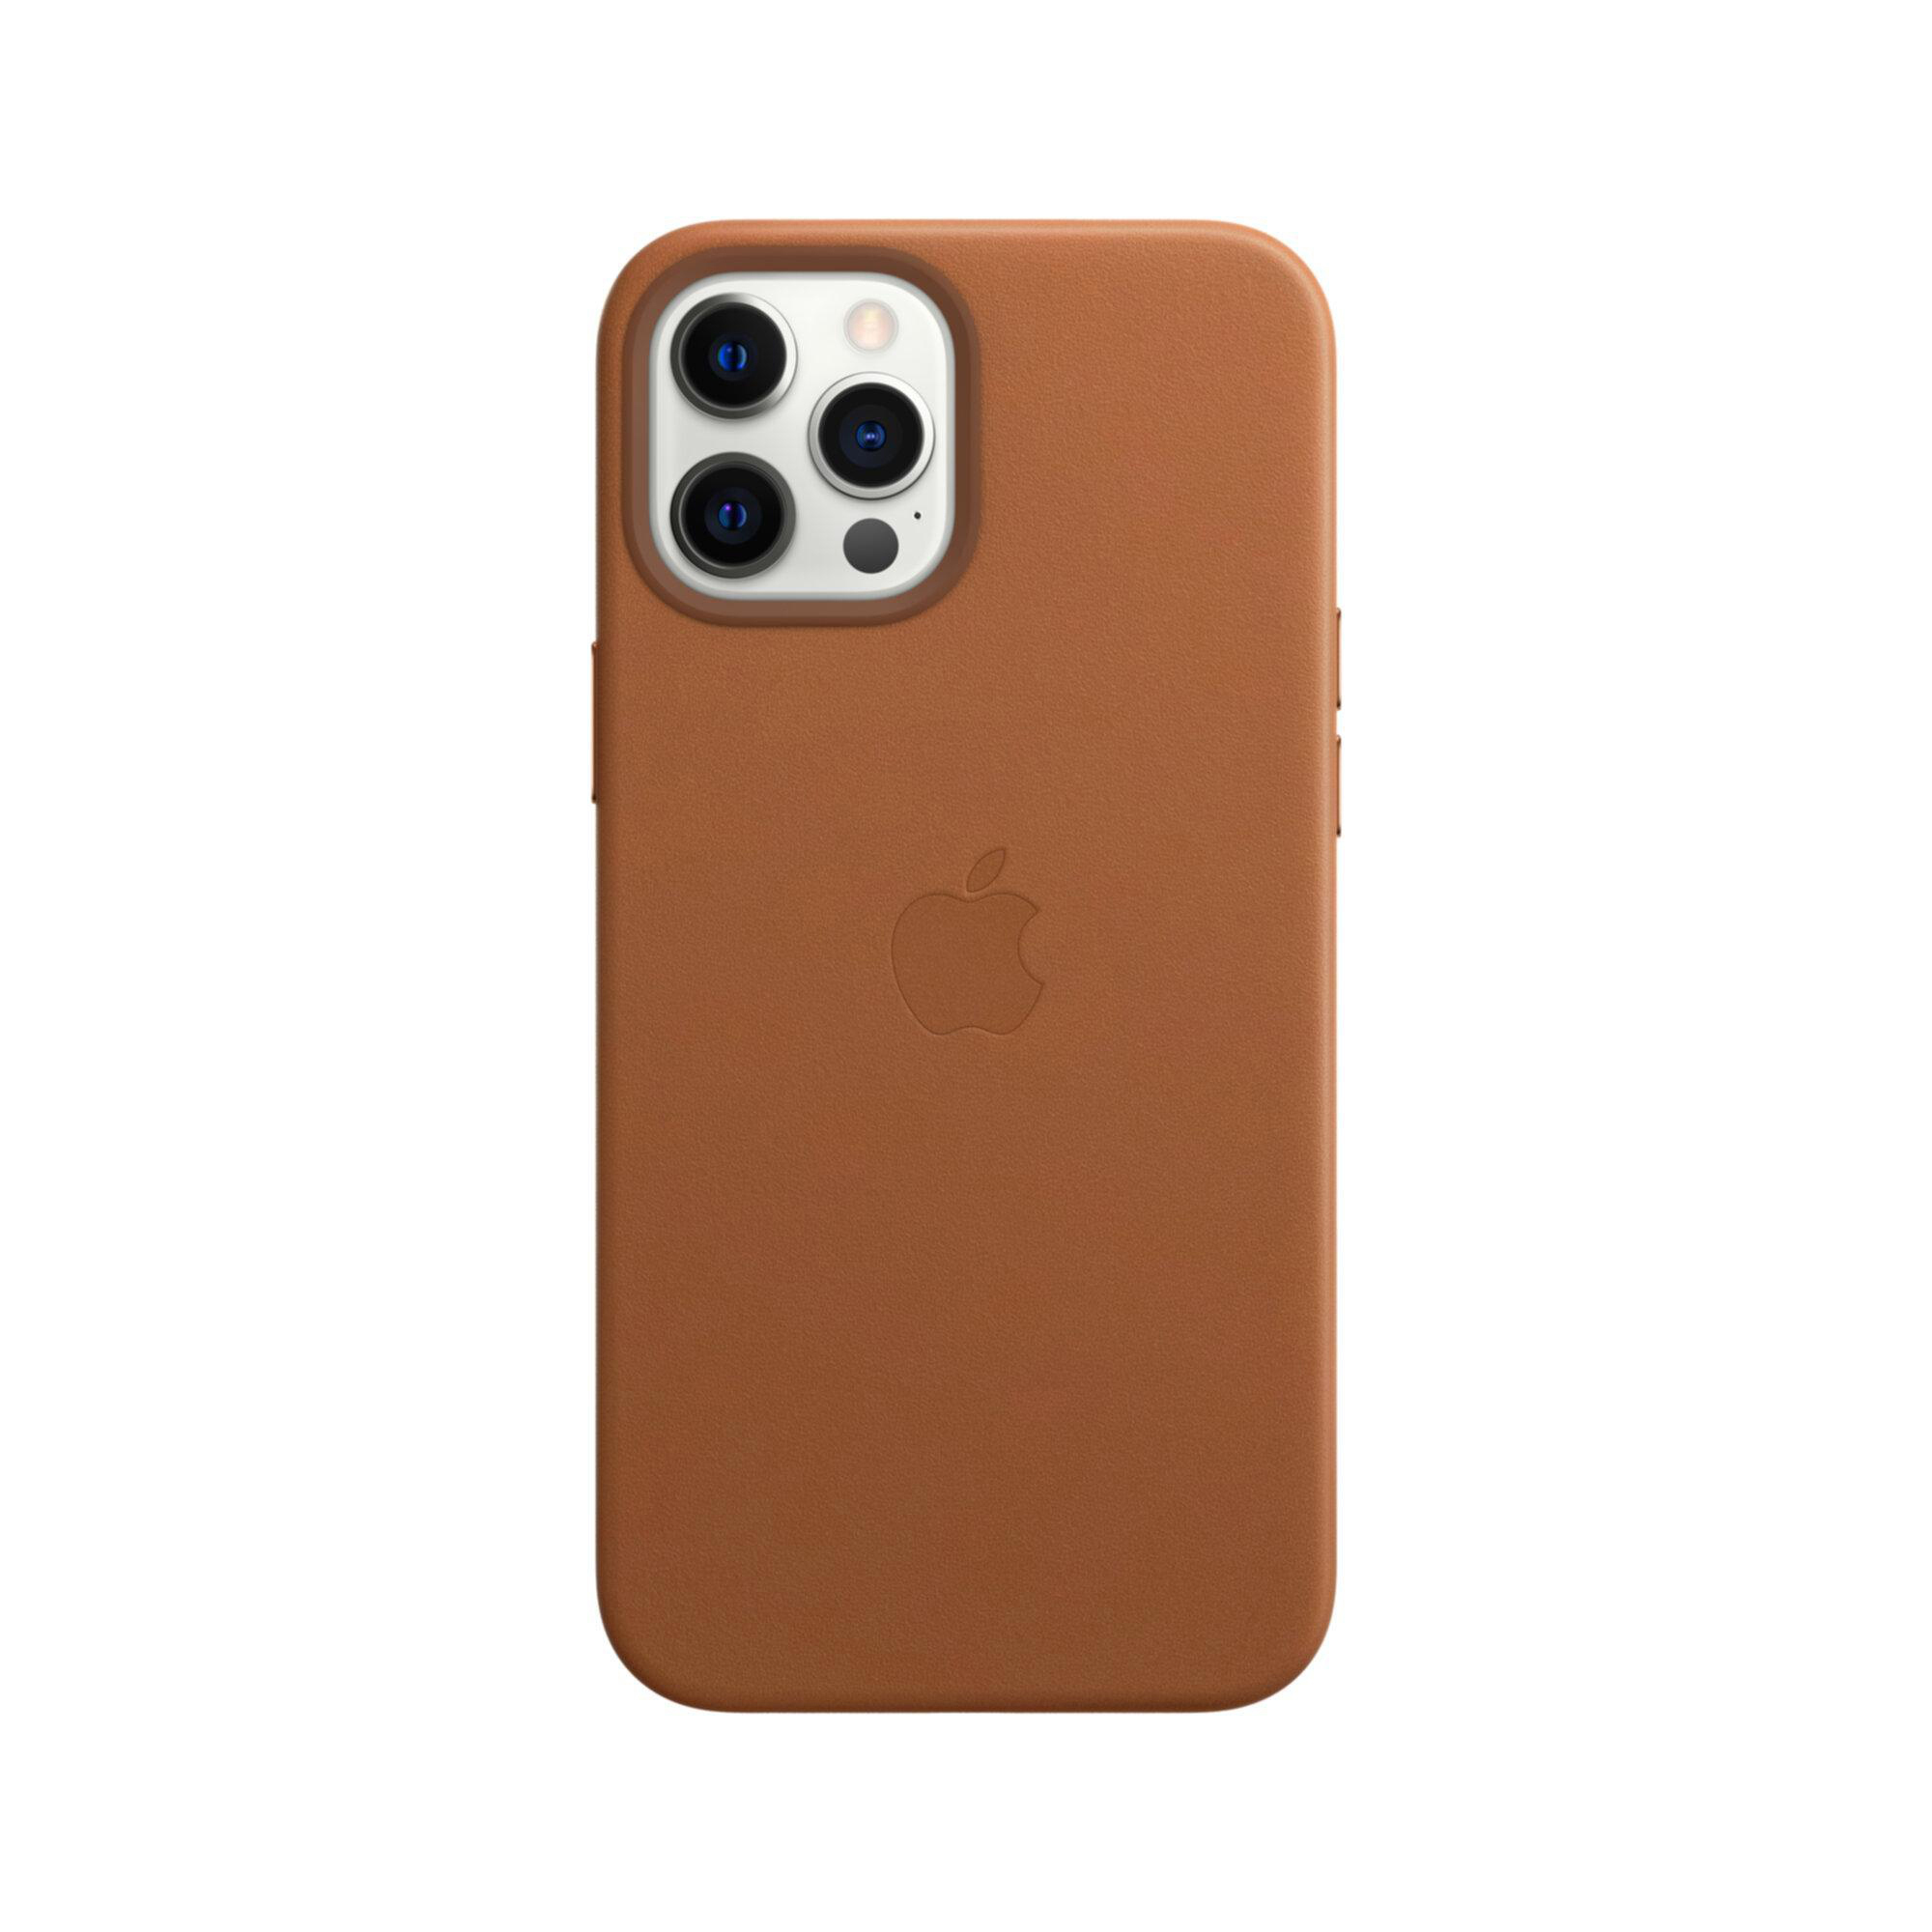 iPhone Saddle 12 Backcover, Apple, MHKL3ZM/A , Max, Pro Brown APPLE